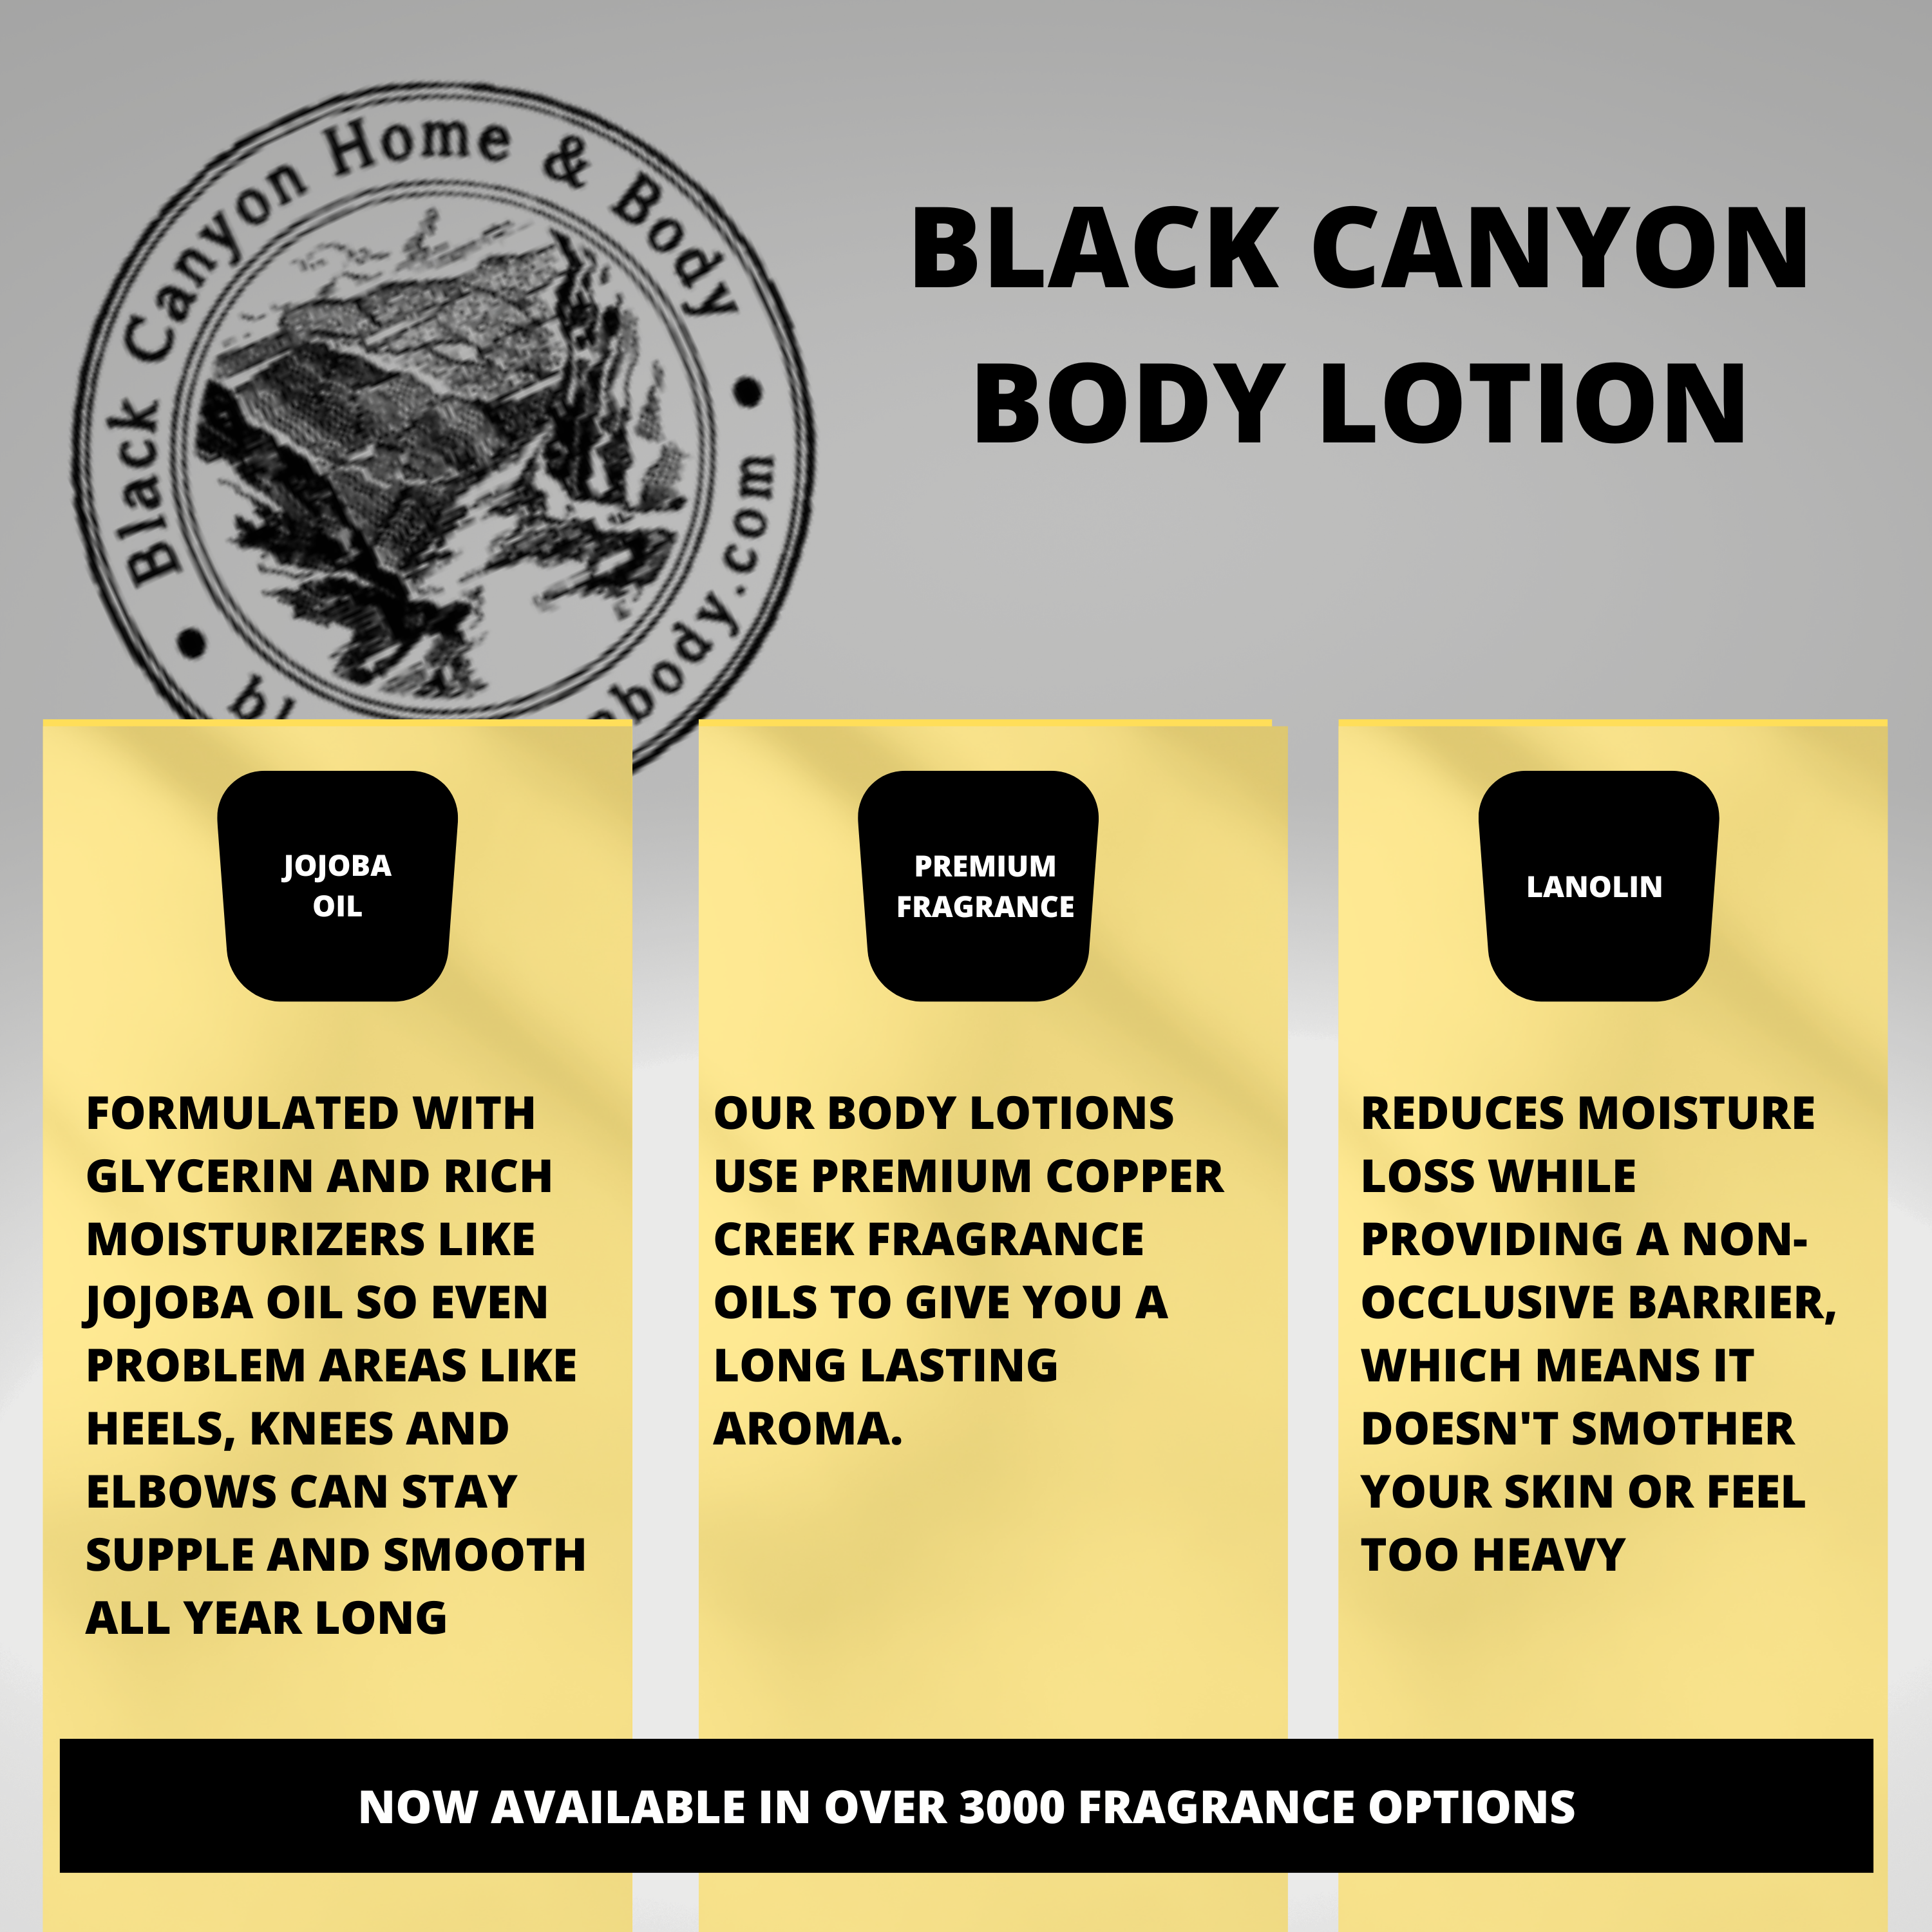 Black Canyon Green Apple & Pear Scented Luxury Body Lotion with Lanolin and Jojoba Oil